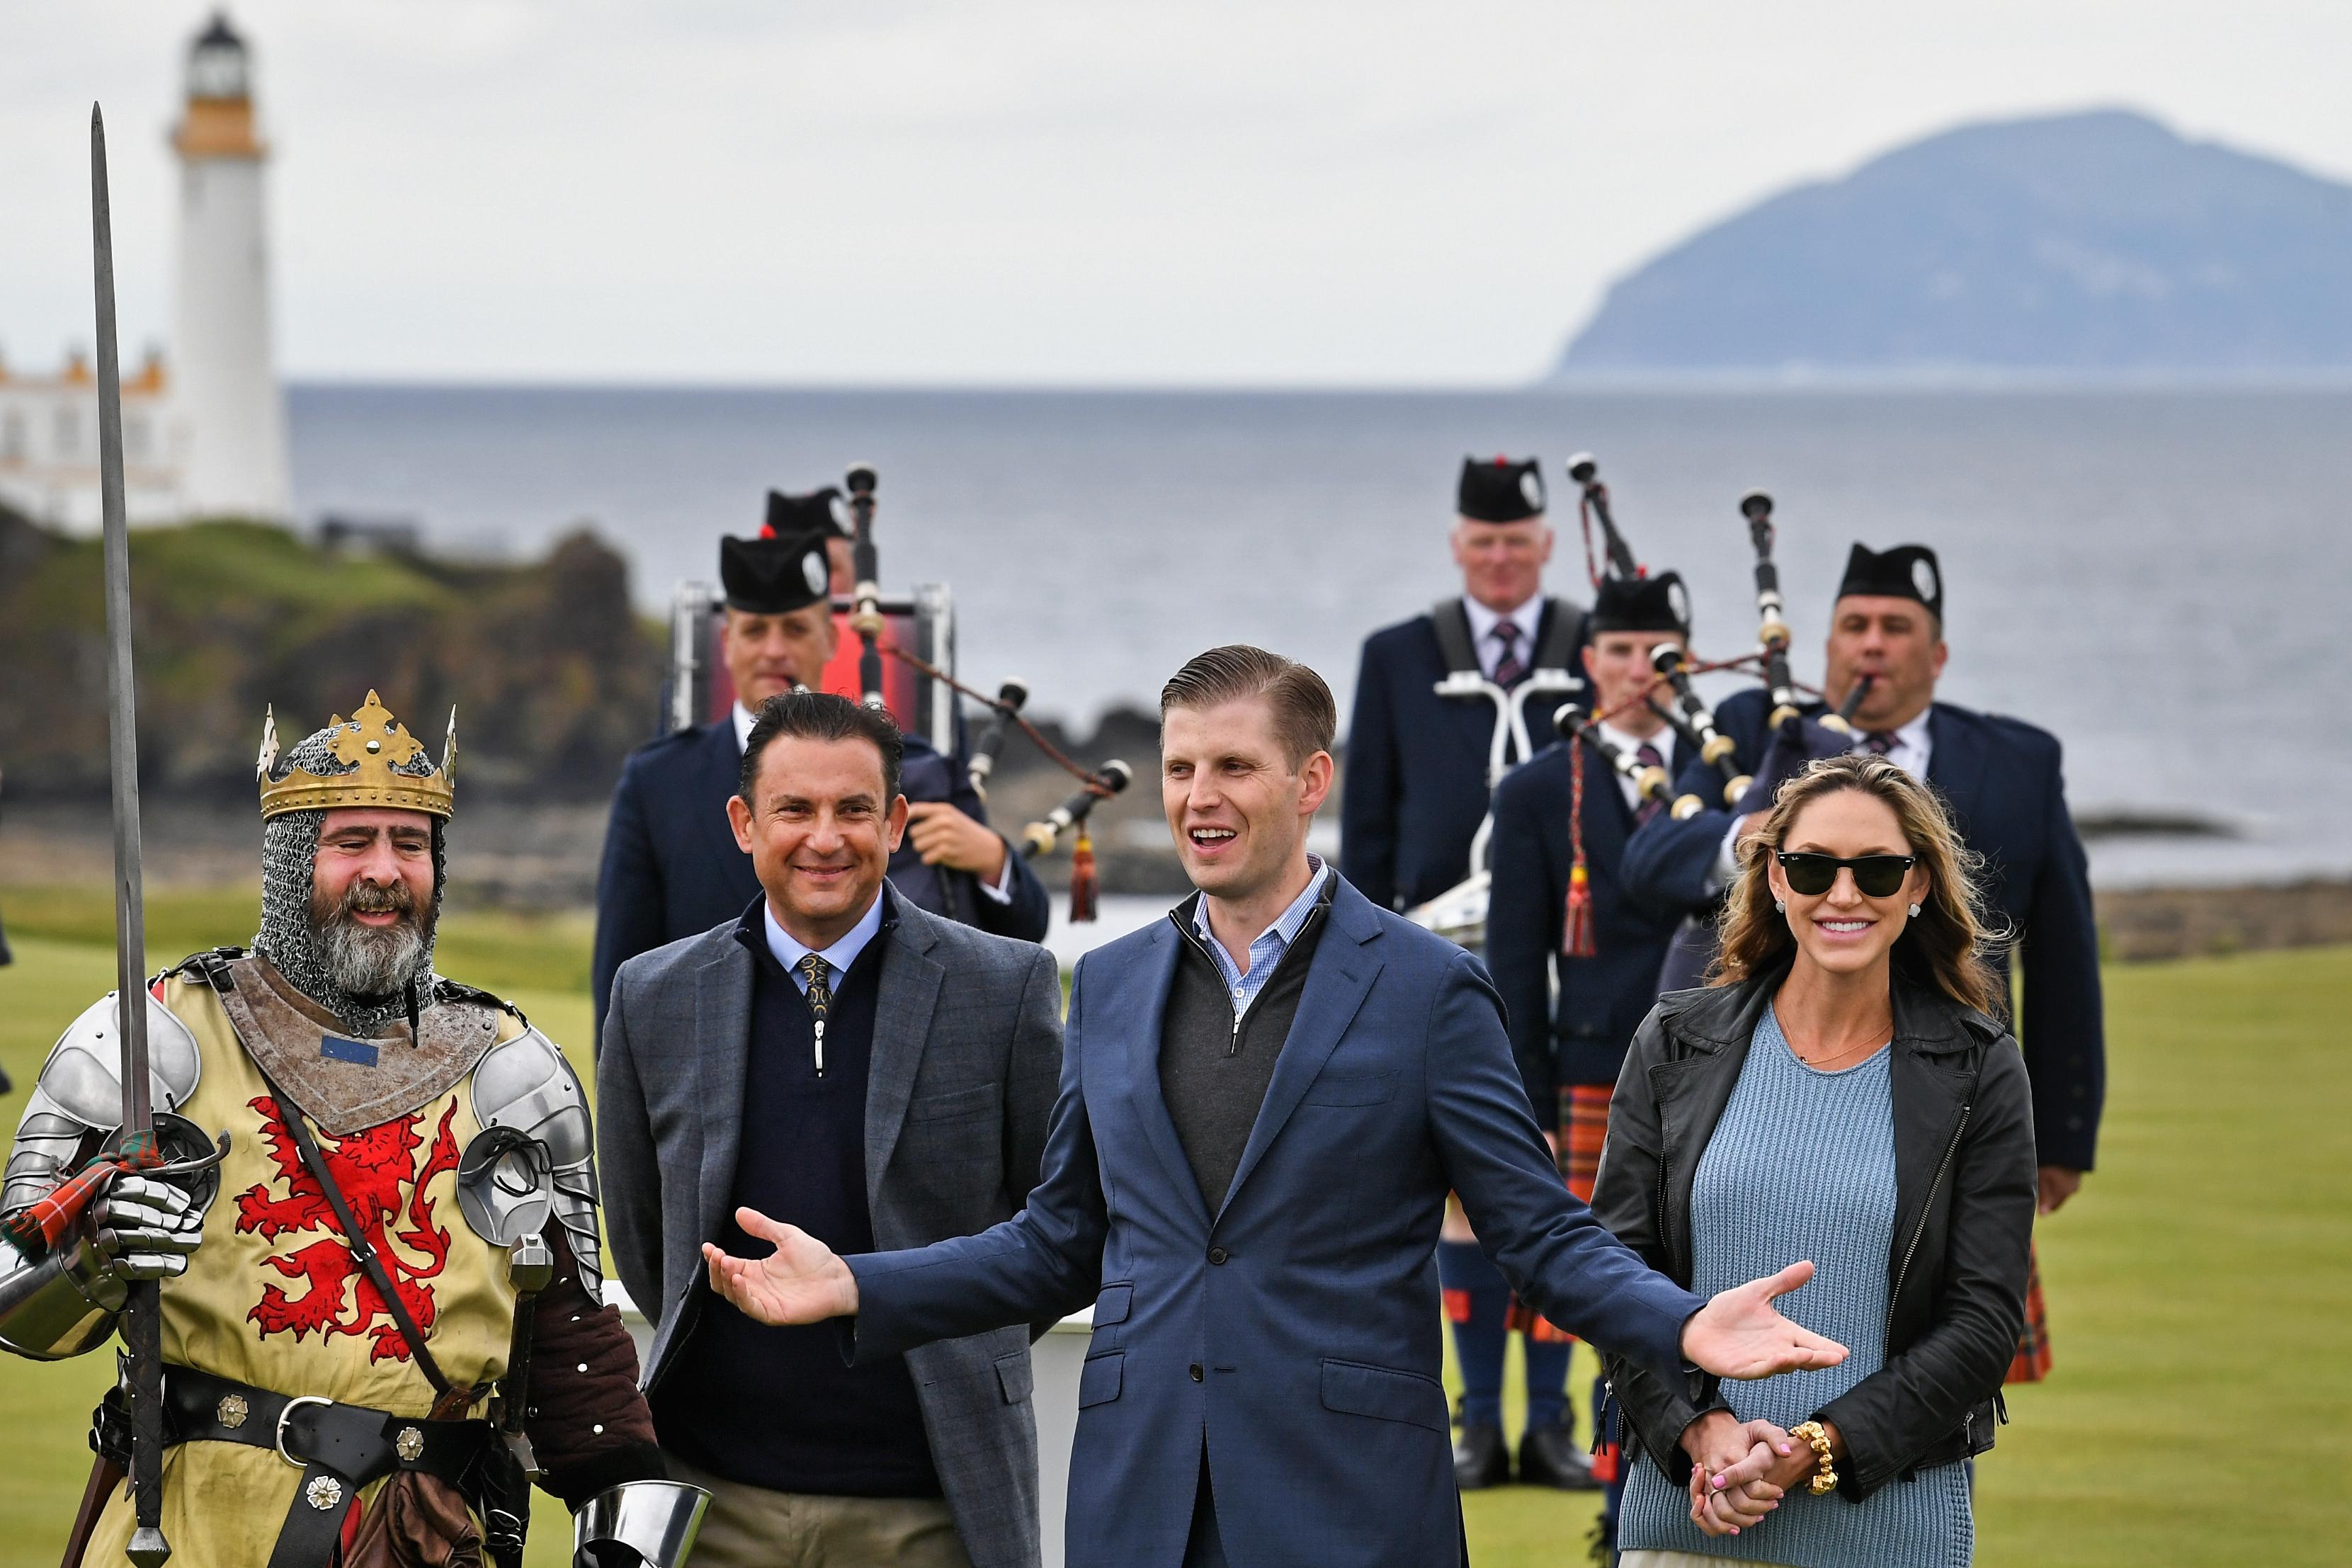 Eric Trump and his wife, Lara, at Turnberry golf course, surrounded by a man dressed as a knight and other men in kilts.